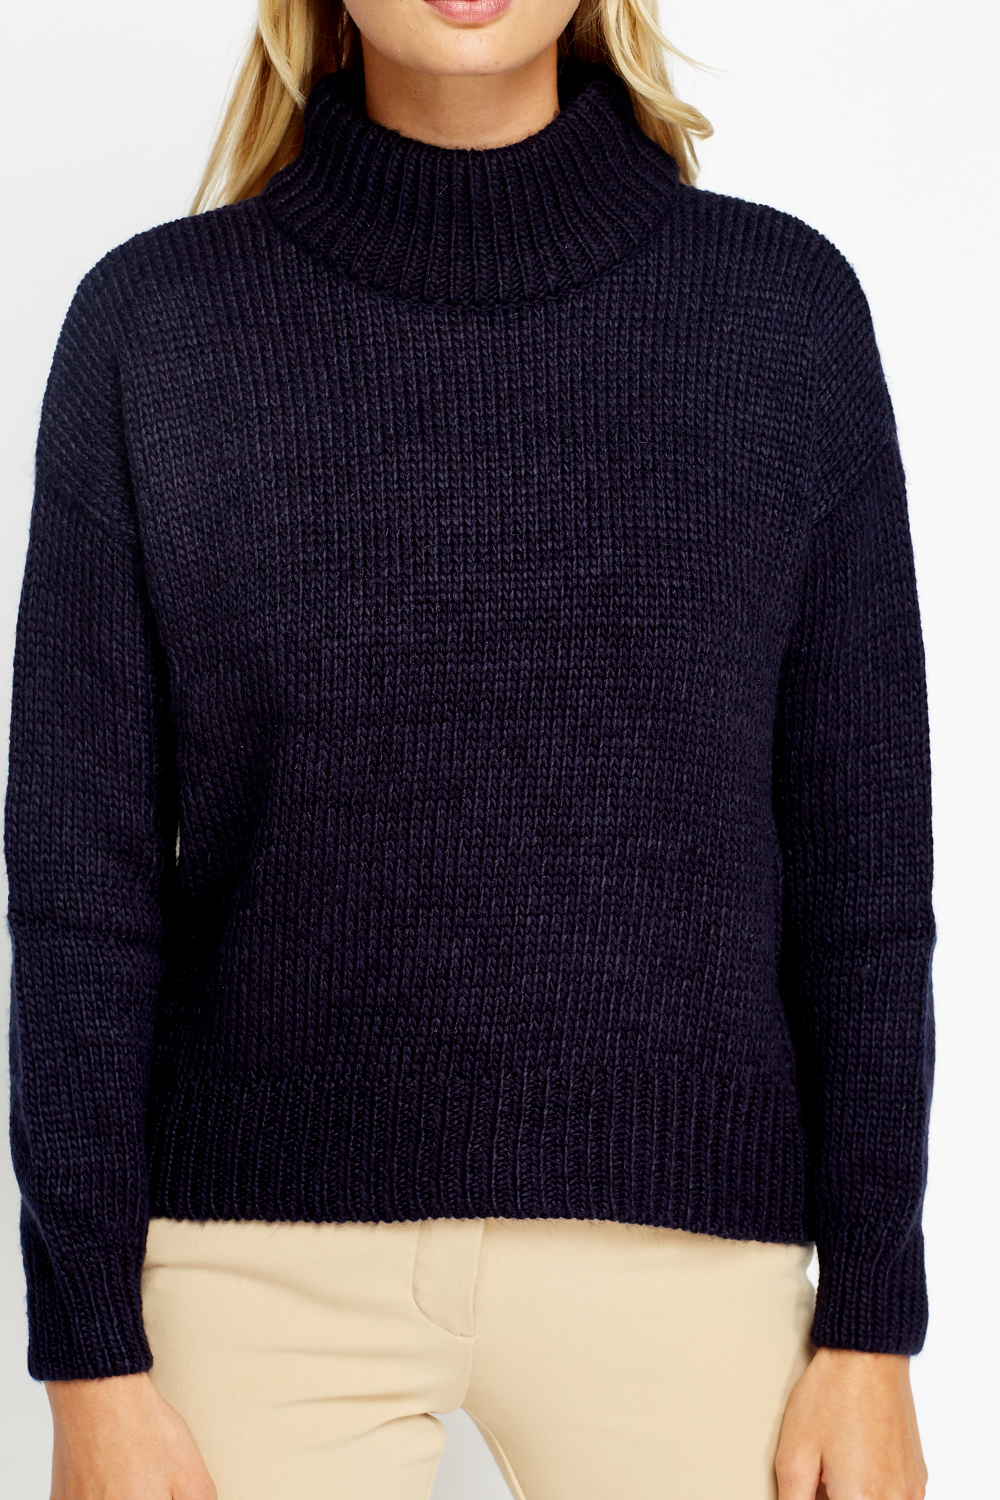 Ribbed High Neck Cropped Knitted Jumper - Just $7